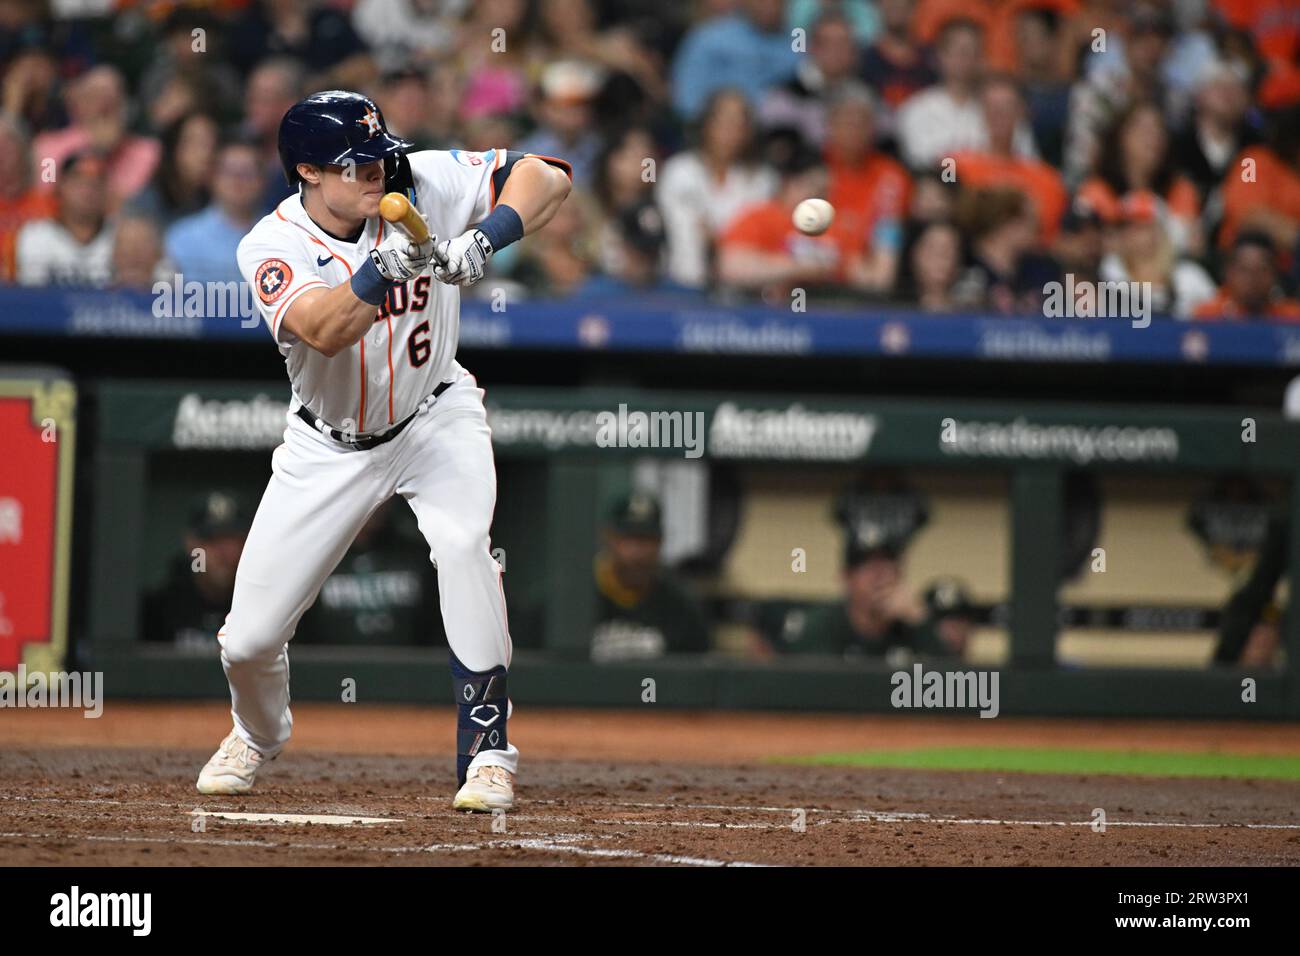 Houston Astros center fielder Jake Meyers (6) drops a perfect bunt for a single in the bottom of the fourth inning of the MLB game between the Oakland Stock Photo